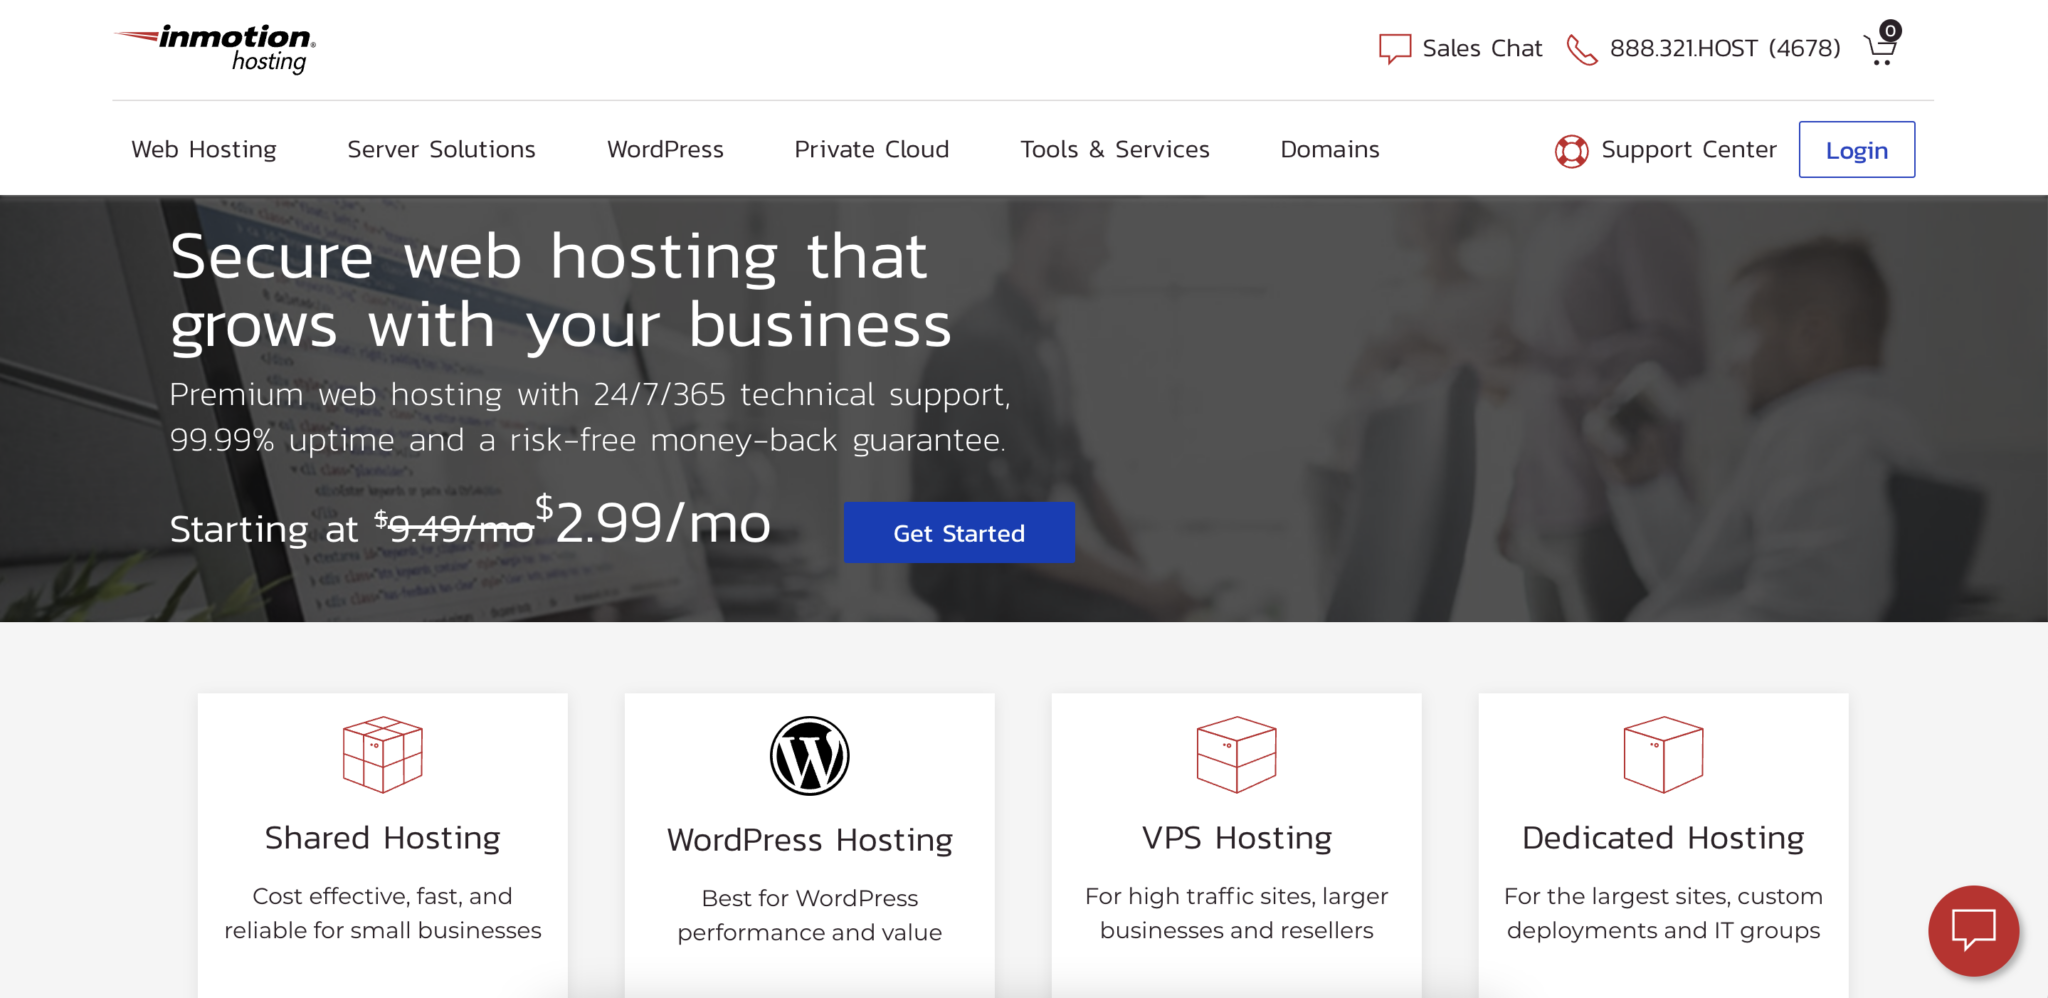 Screenshot of the In Motion hosting homepage.